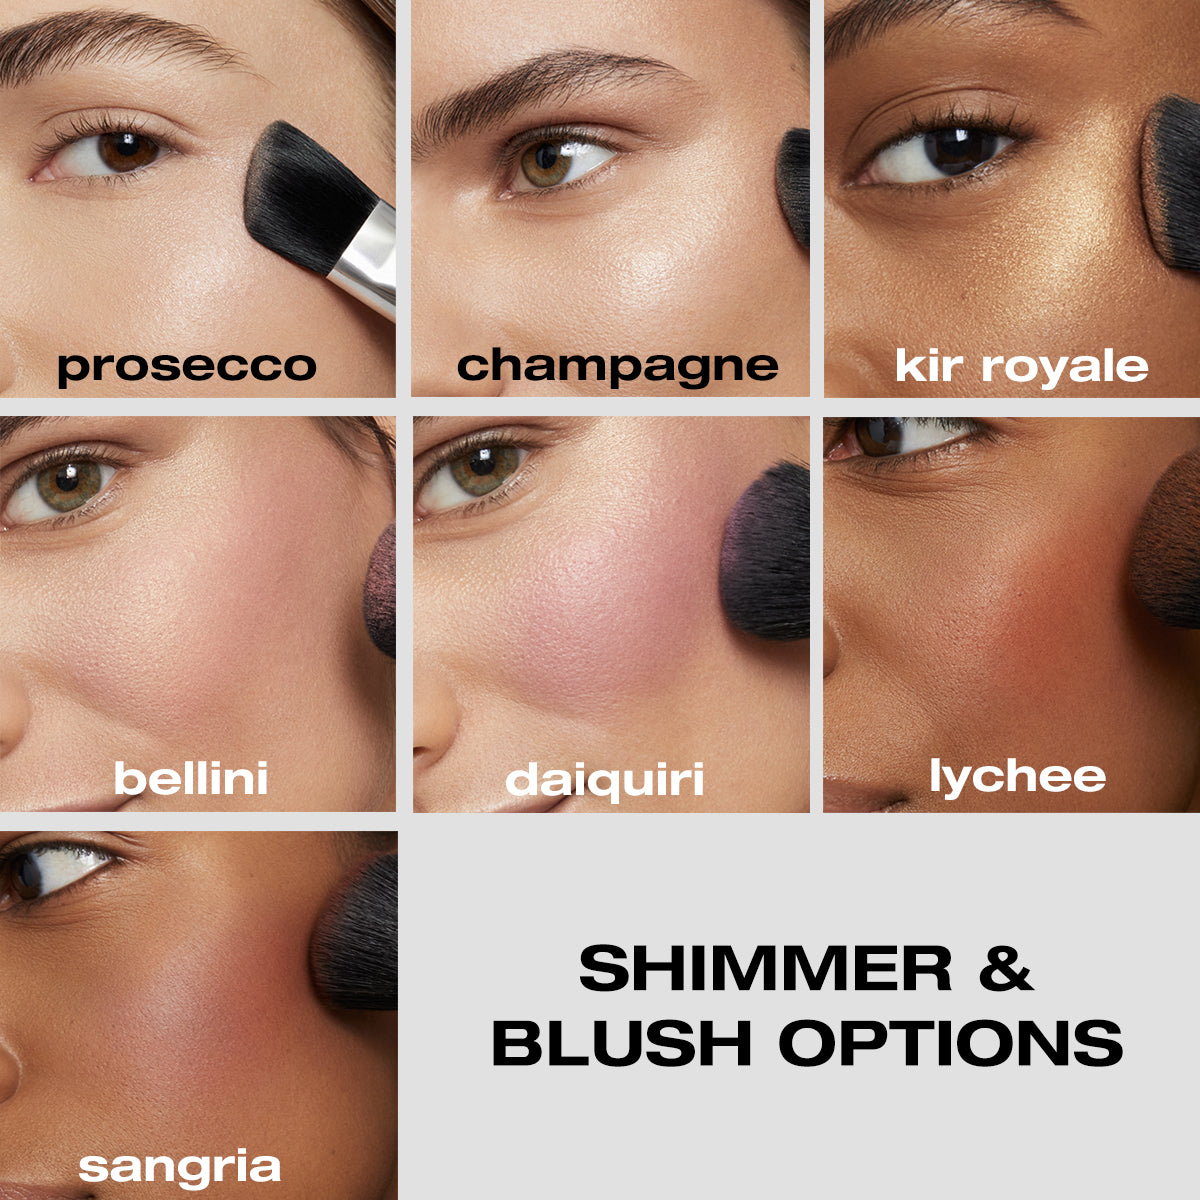 Shimmer options from lightest to darkest shades : Prosecco, champagne, kir royale. Blush options from lightest to darkest: belinni, daiquiri, lychee, sangria